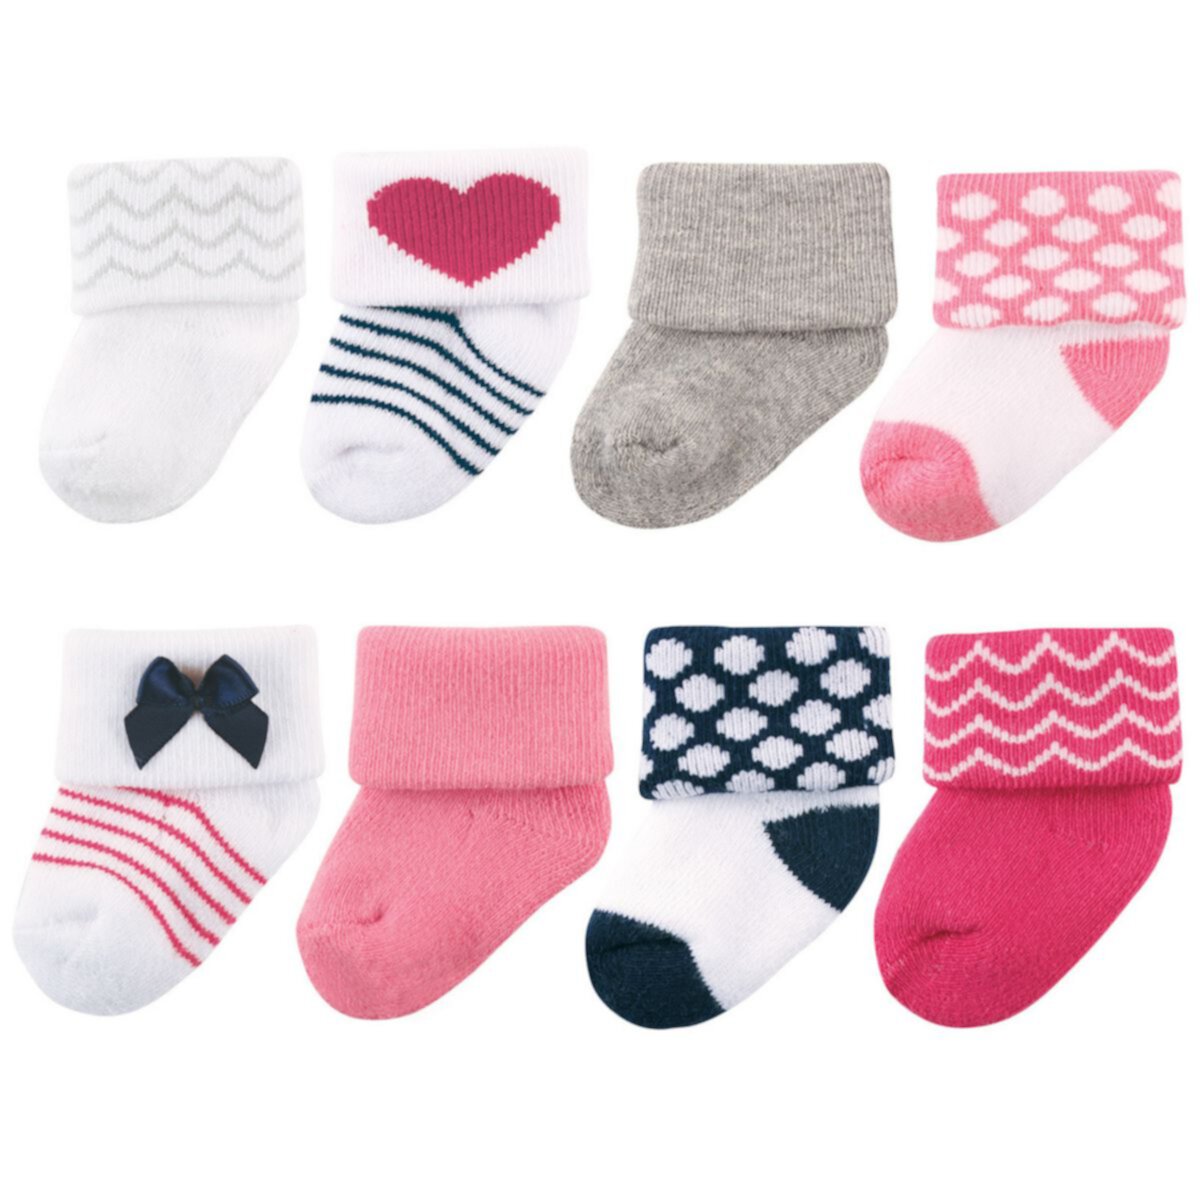 Luvable Friends Baby Girl Newborn and Baby Terry Socks, Bow Luvable Friends